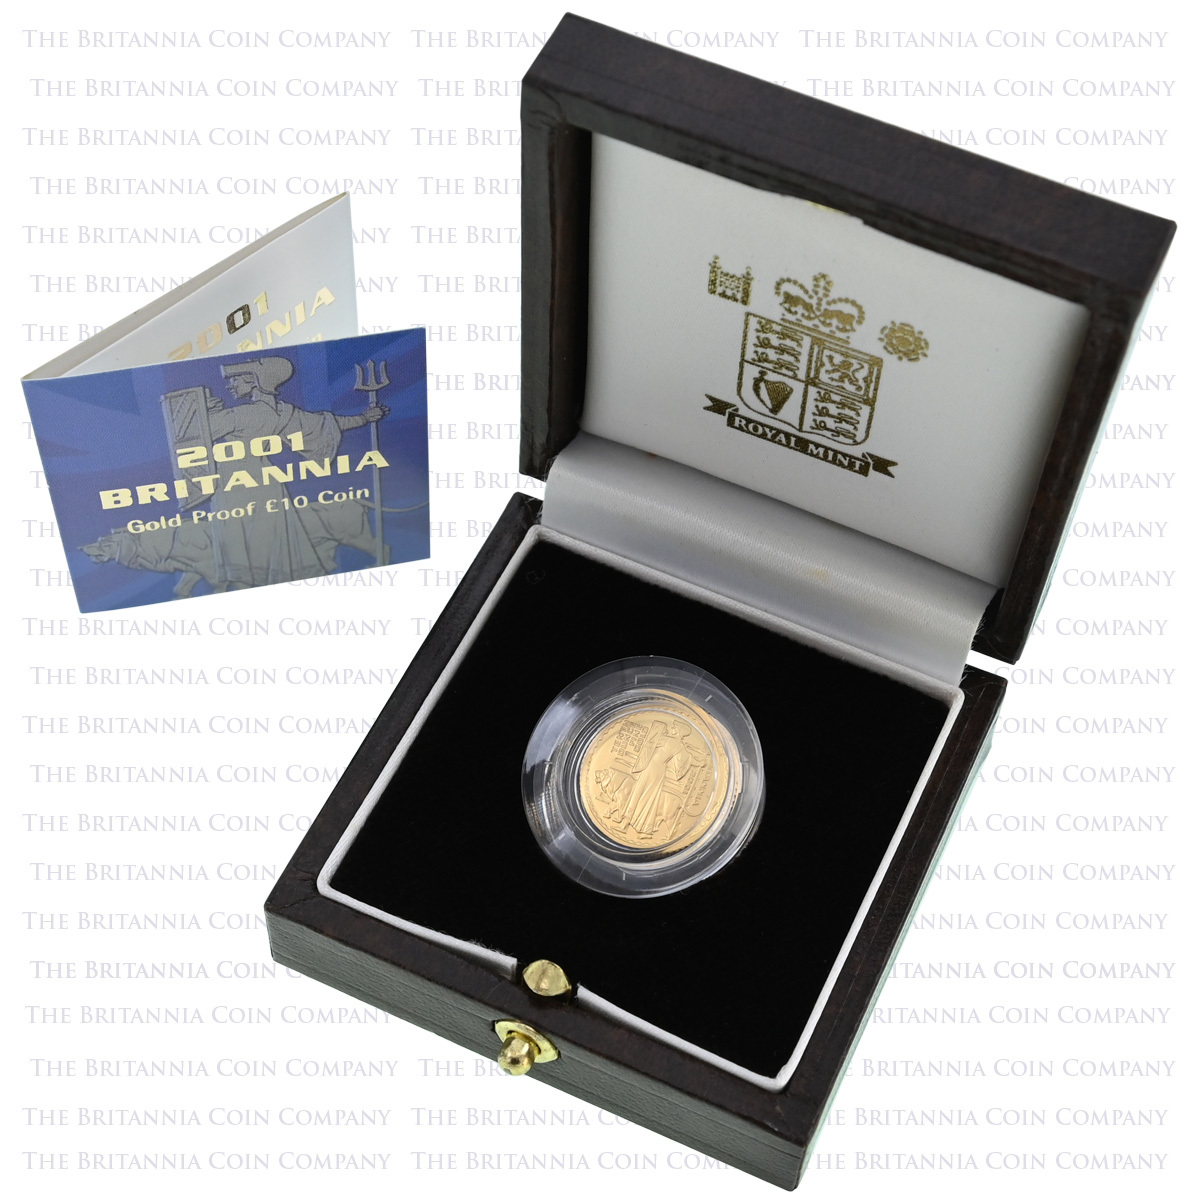 2001 Britannia Tenth Ounce Gold Proof Coin Boxed